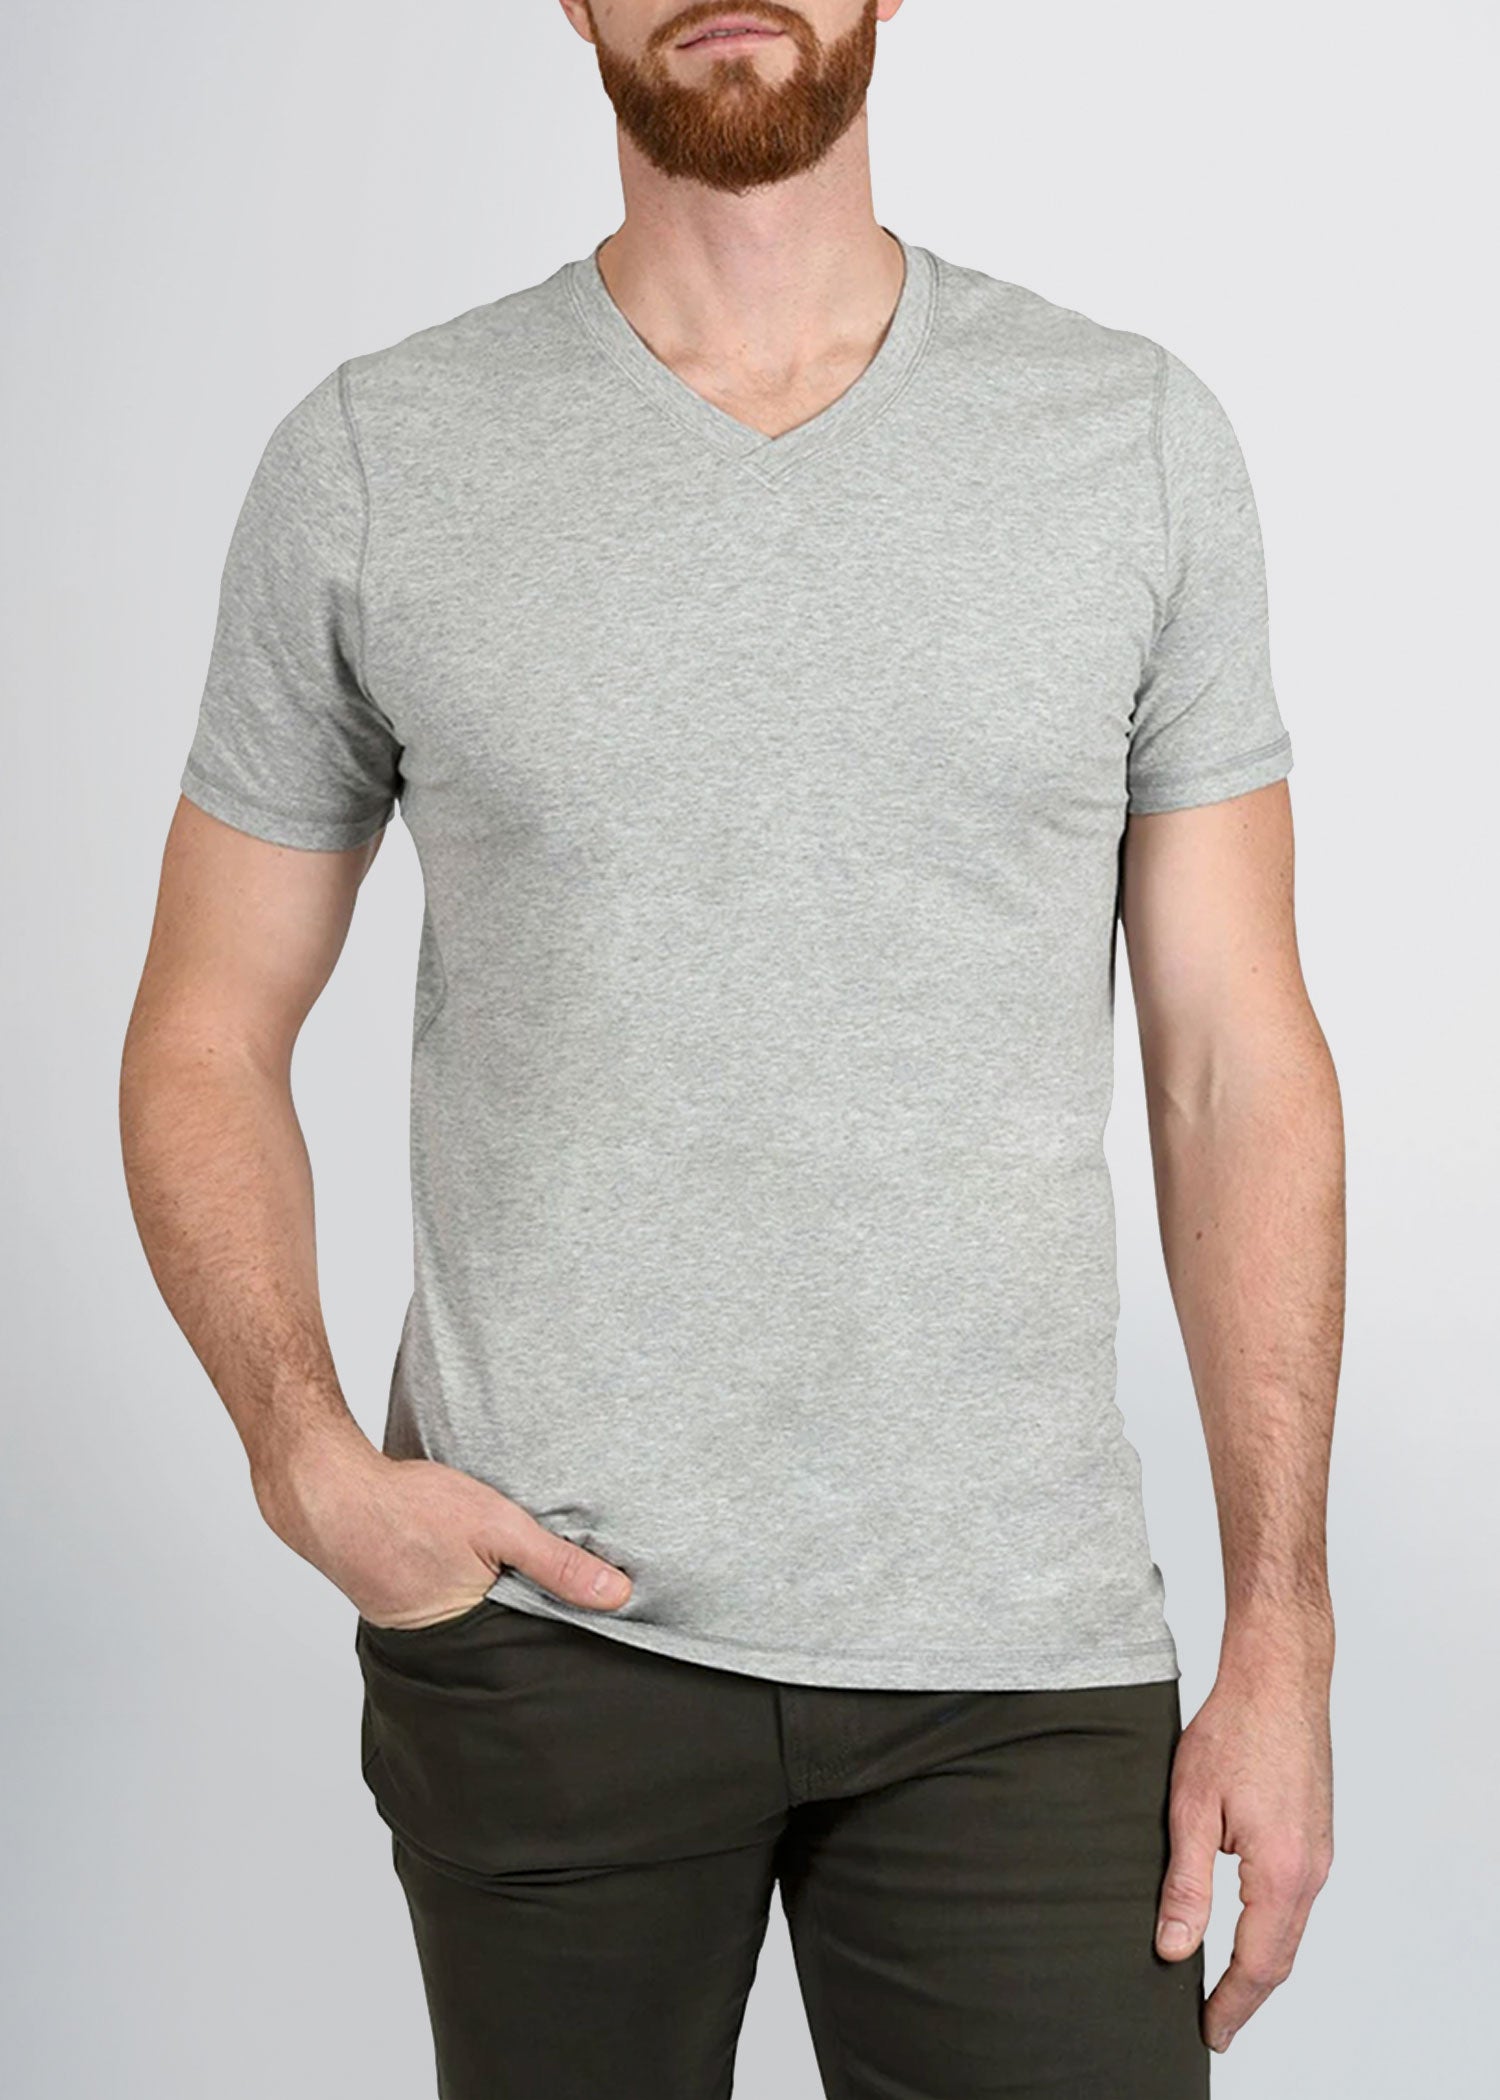 Best Fitting V-Neck T-Shirts for Men - Buyers Guide